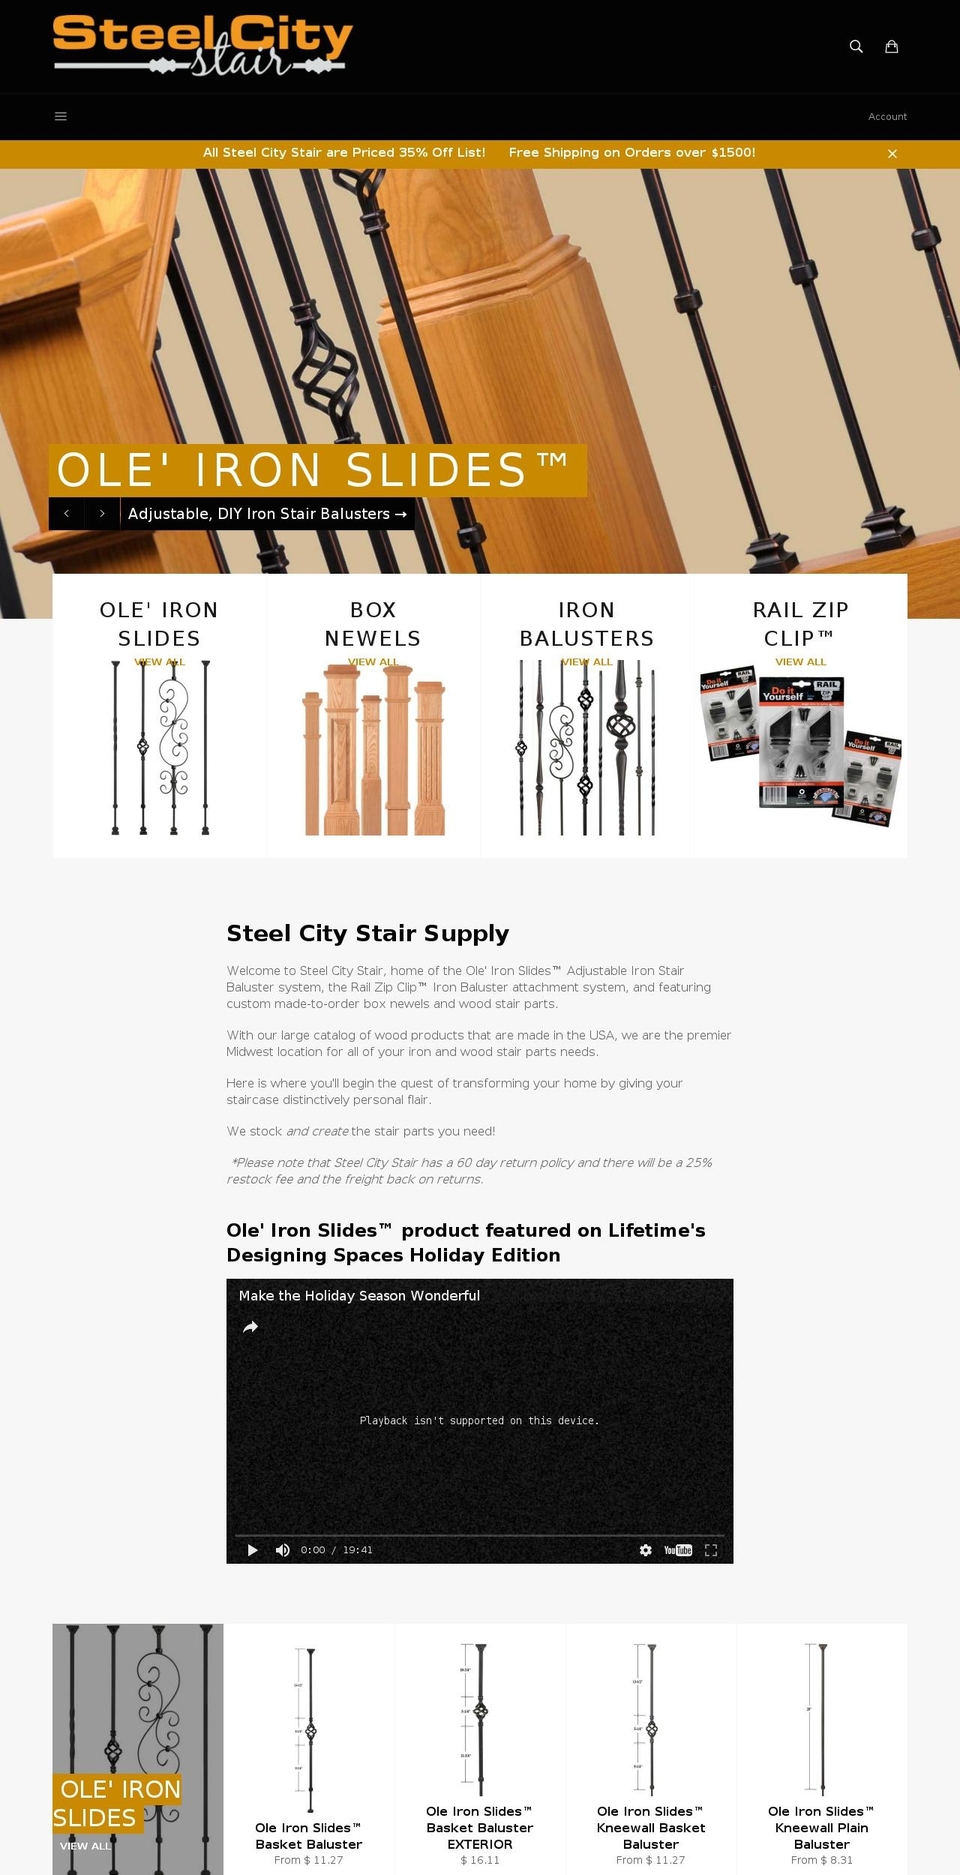 Crave Shopify theme site example steelcitystair.com